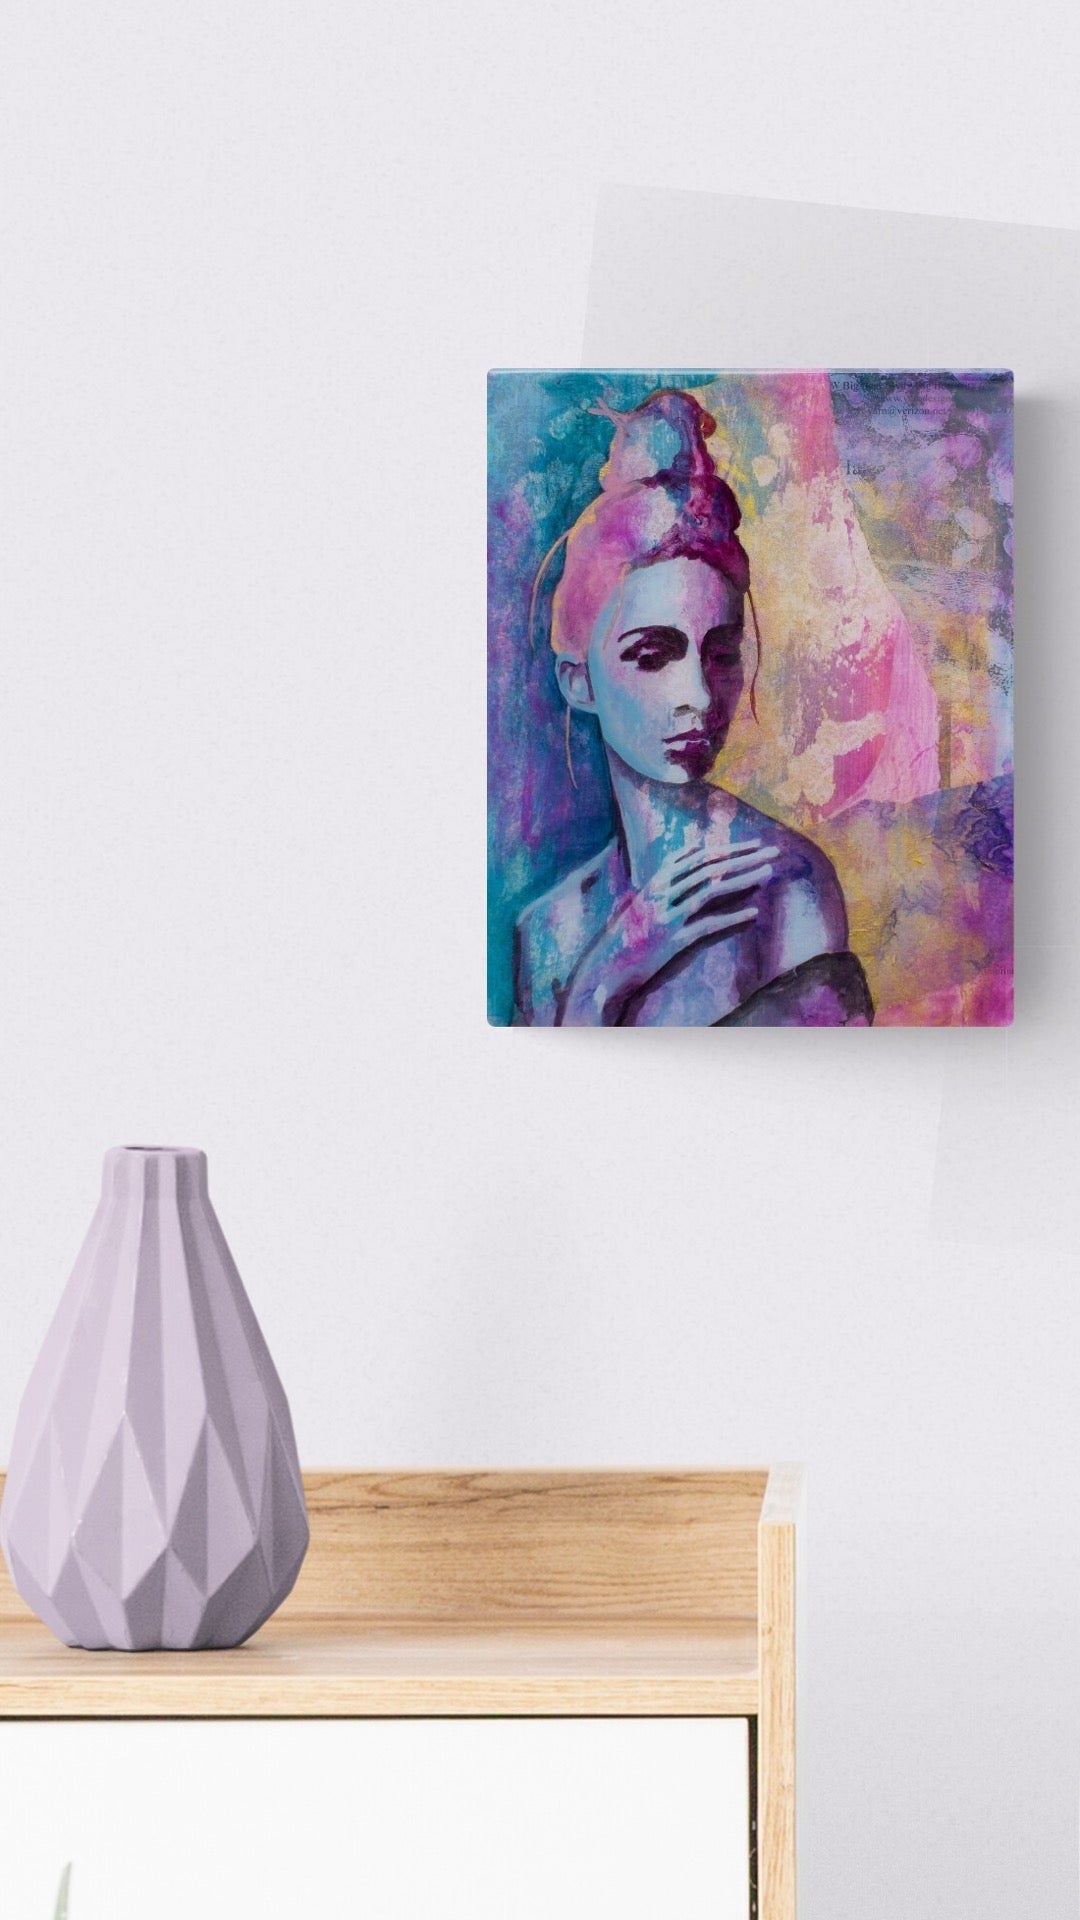 abstract art portait of a Woman on Panel art wall painting Blue, Gold, Purple 8" x 10" artists in melbourne